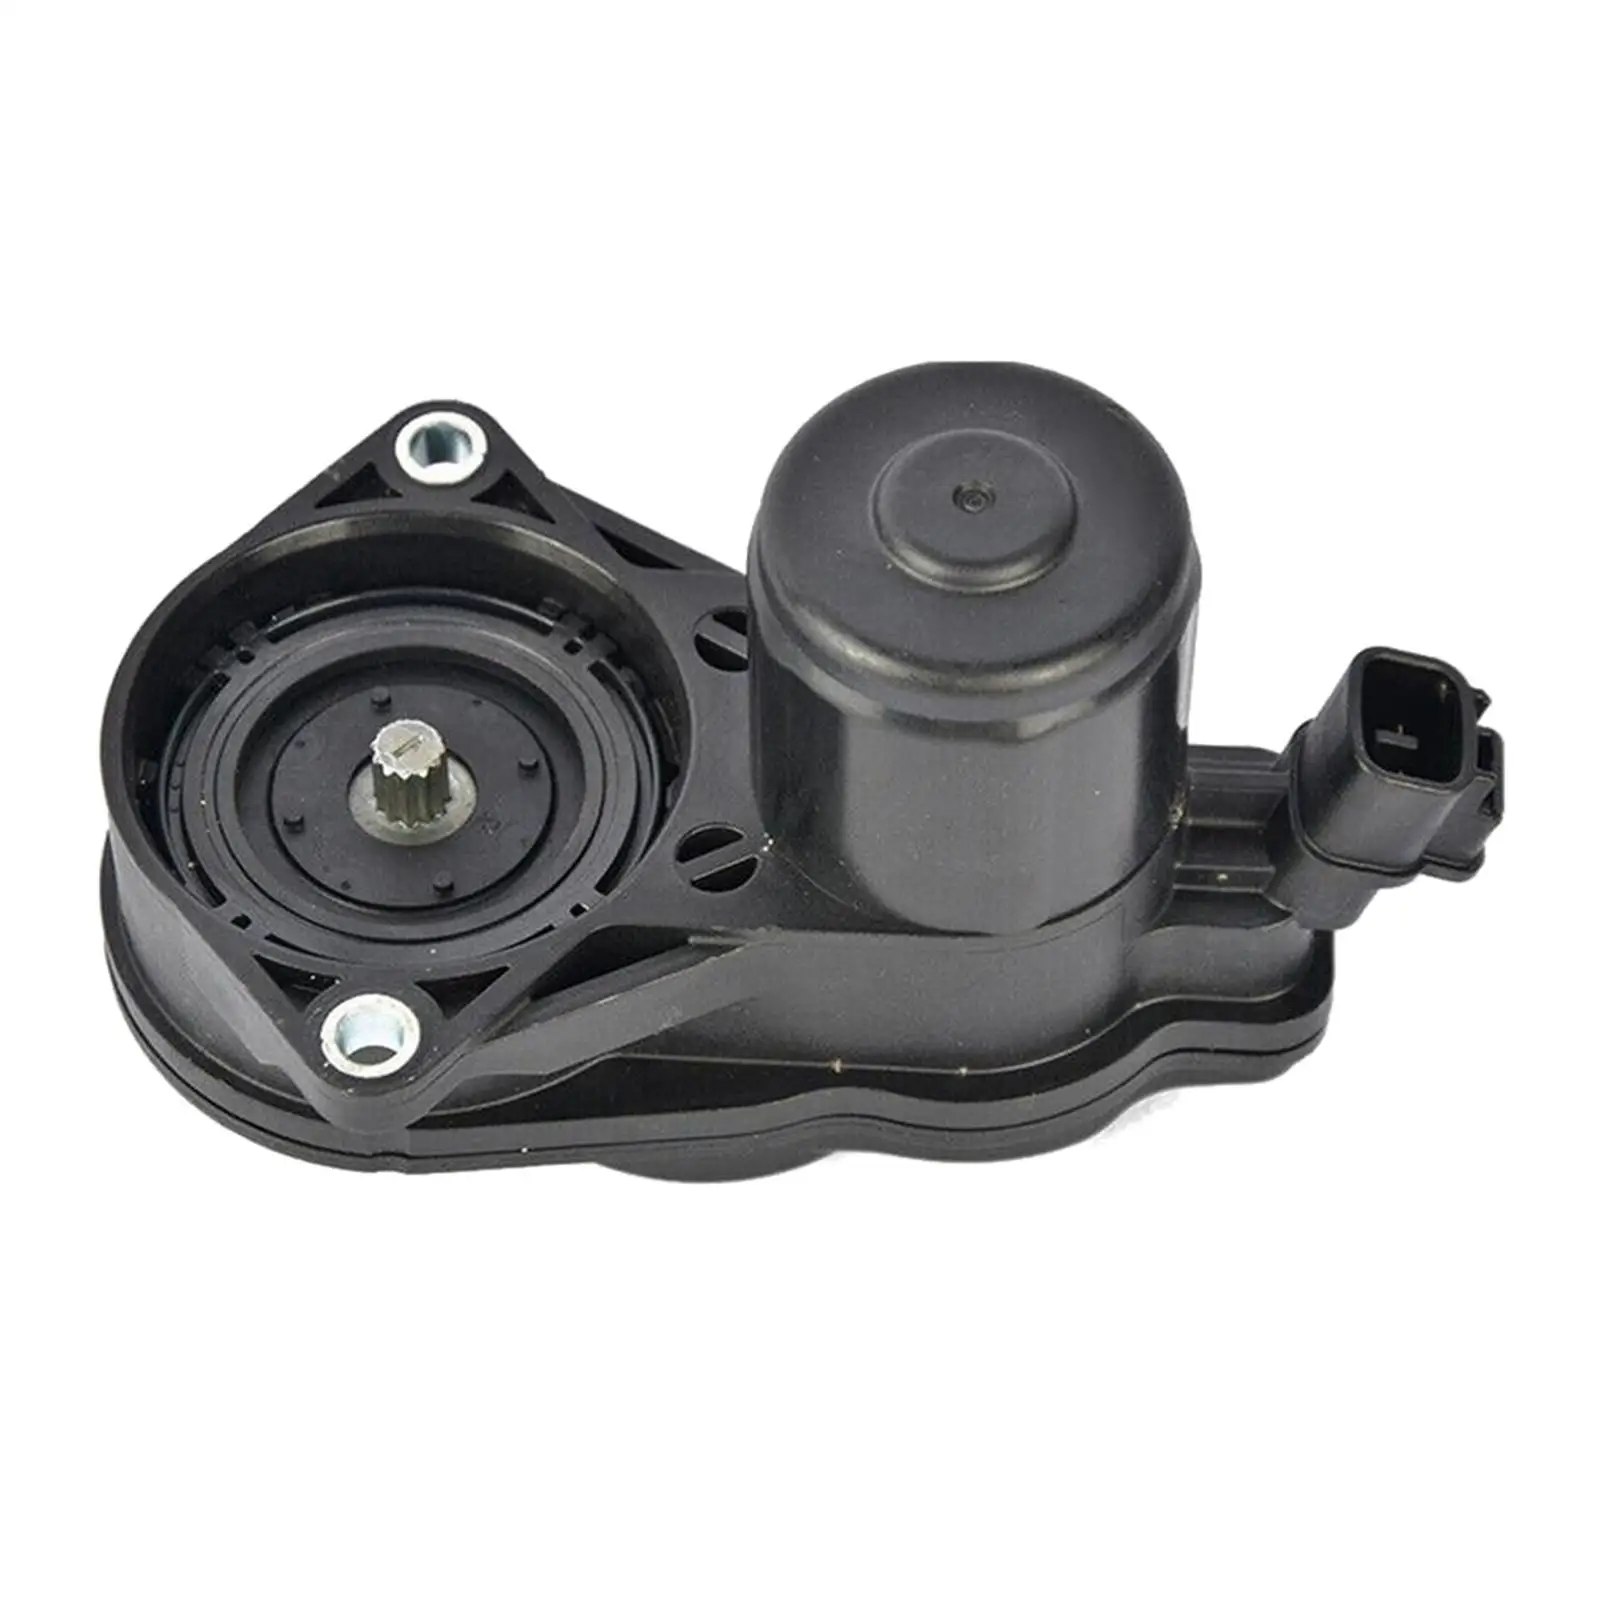 Parking Brake Actuator Car Accessories 46310-33010 replacement for toyota Venza Corolla Hatchback for camry Good Performance